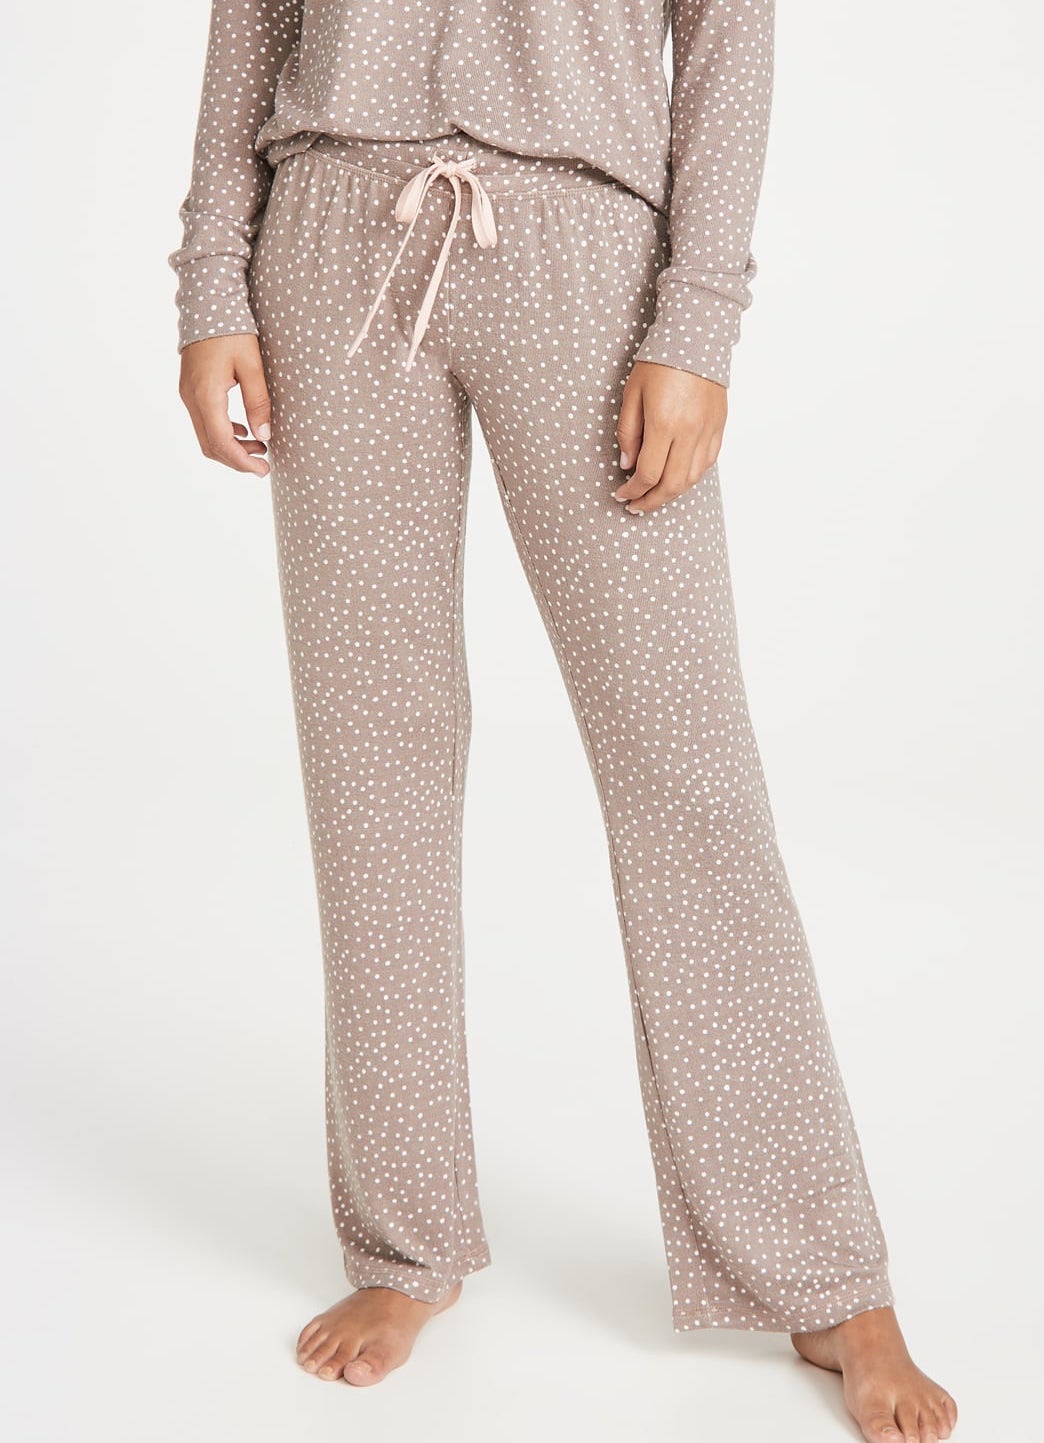 Cocoa Dot Pant - Peggy's Gifts & Accessories